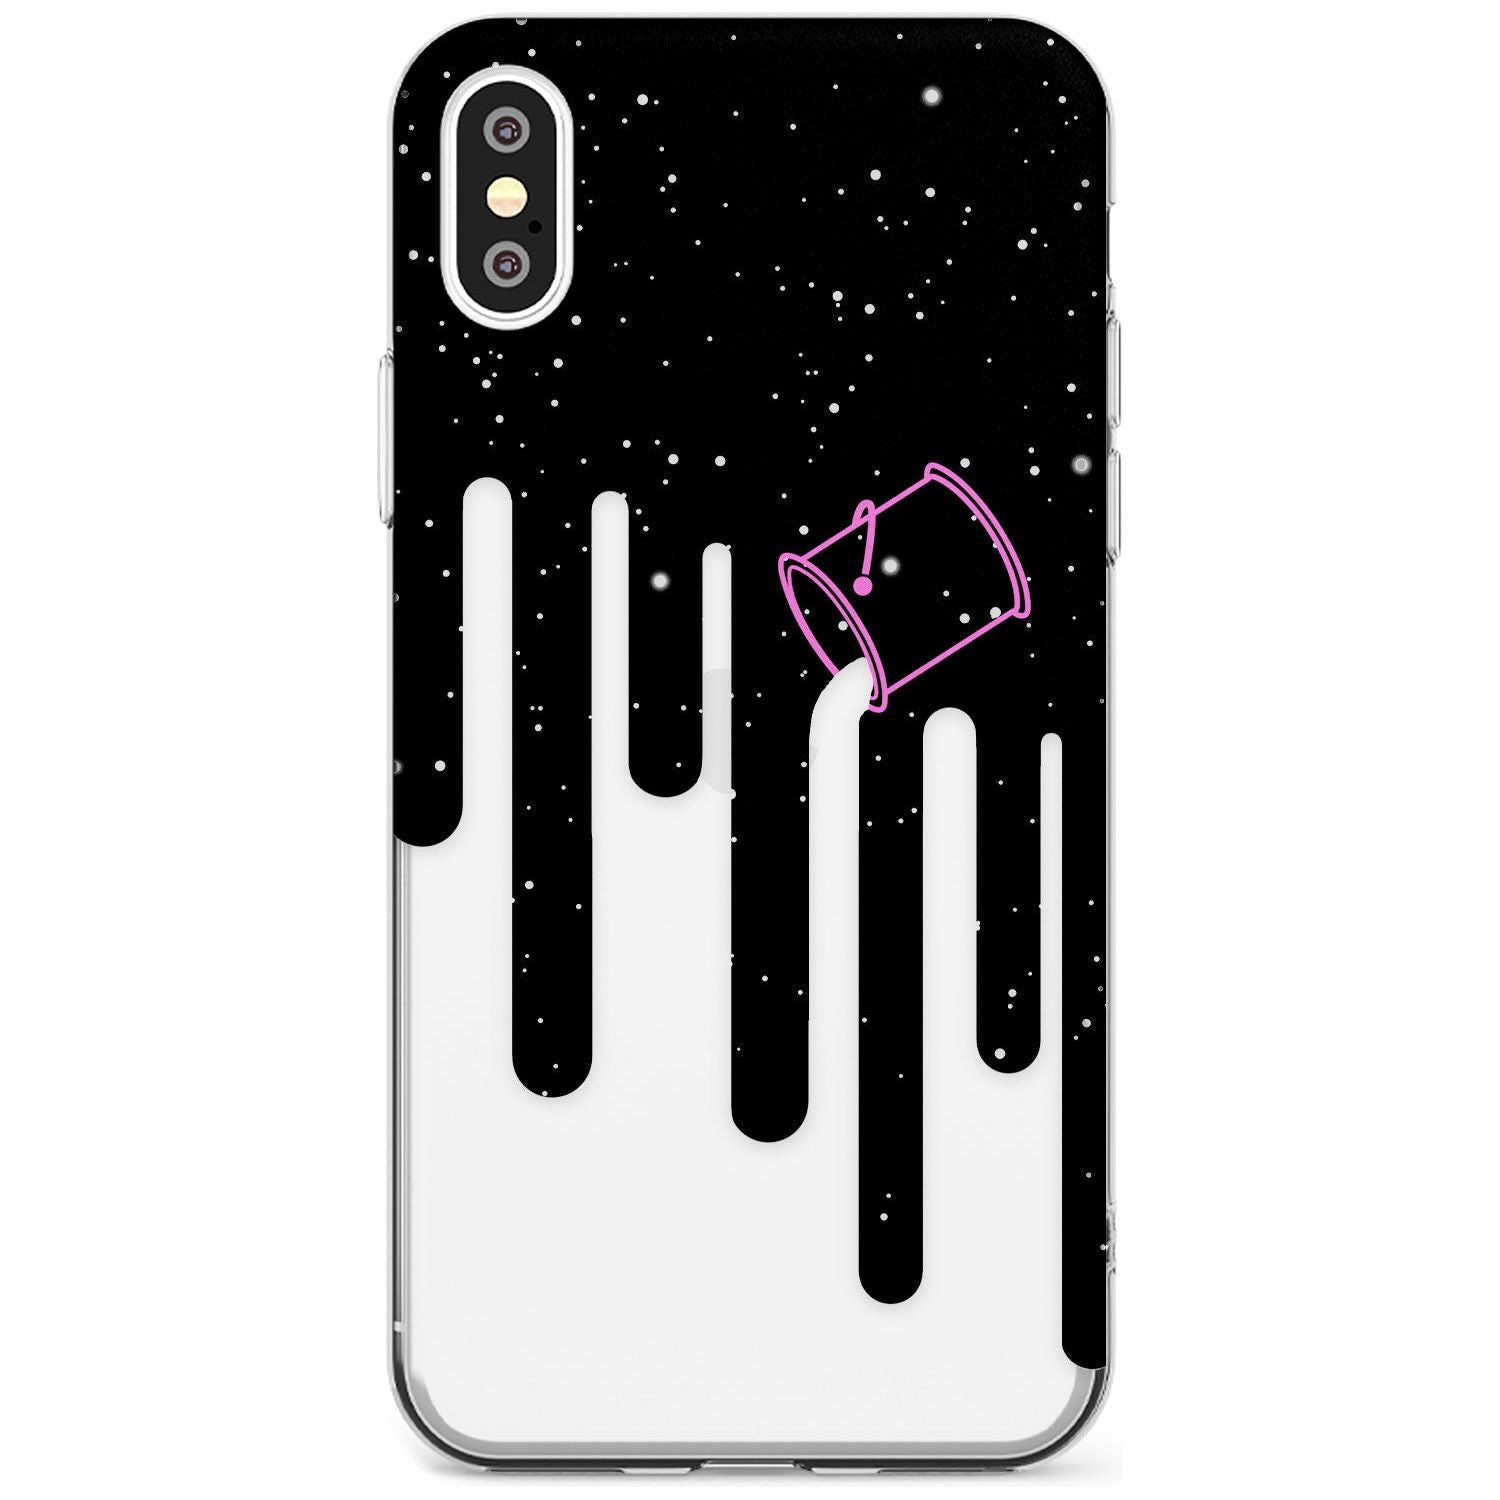 Space Bucket Black Impact Phone Case for iPhone X XS Max XR